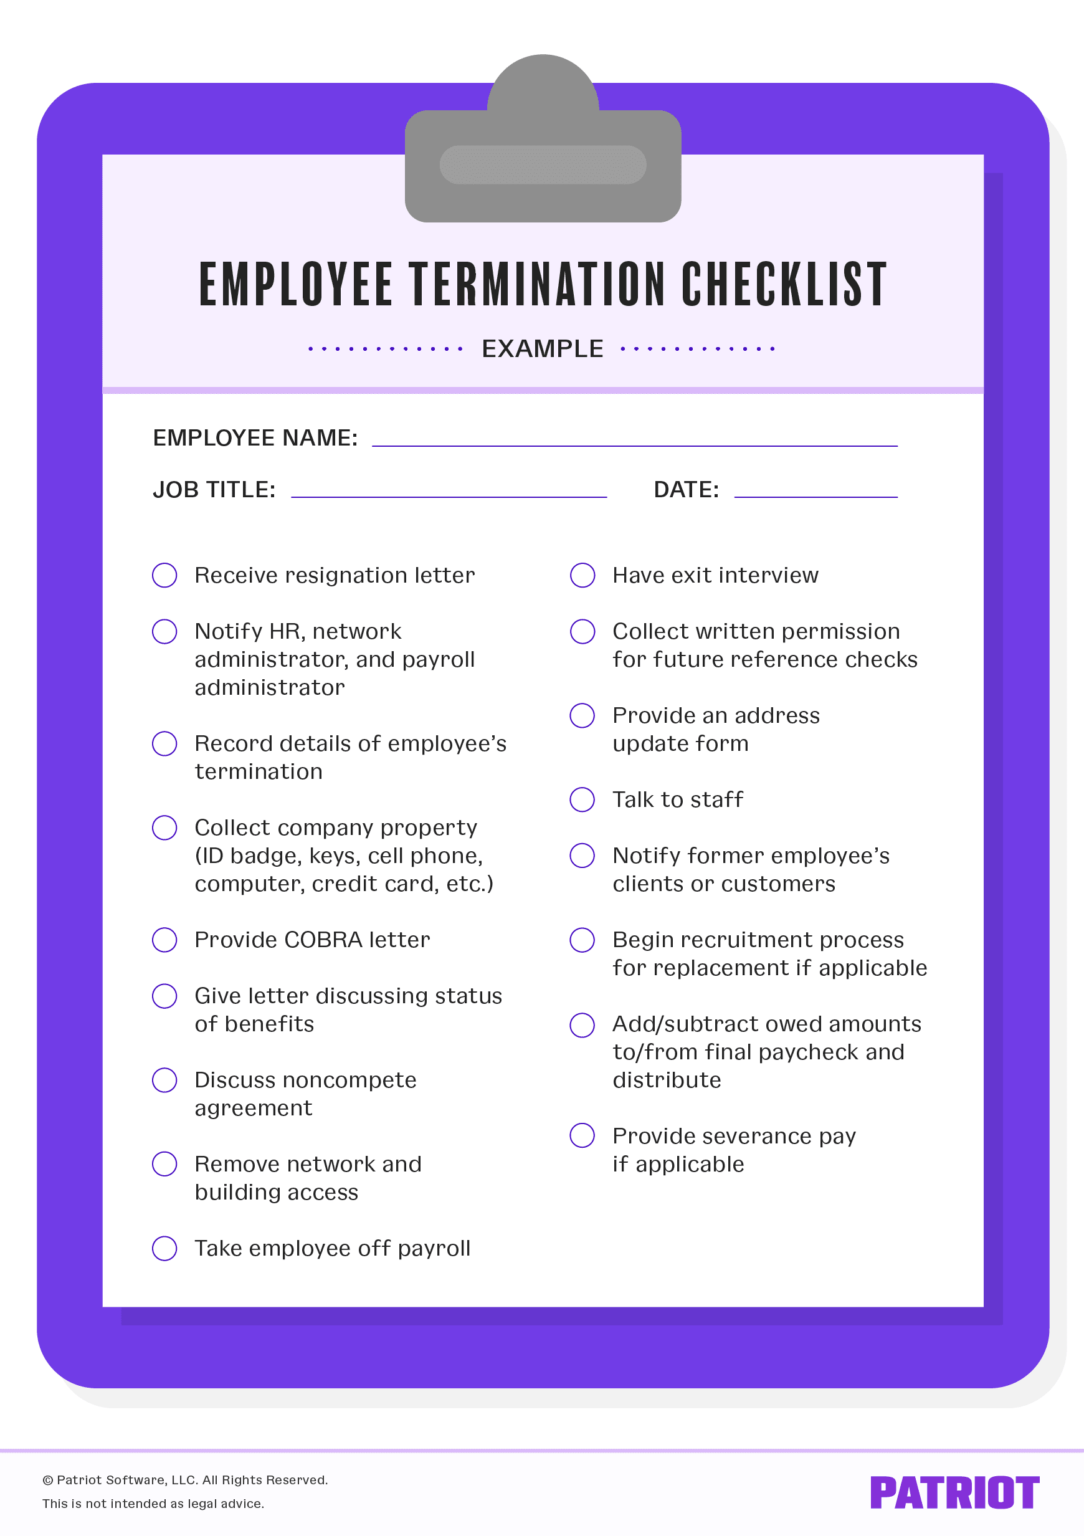 Employee Termination Checklist | How to Stay Compliant & Professional